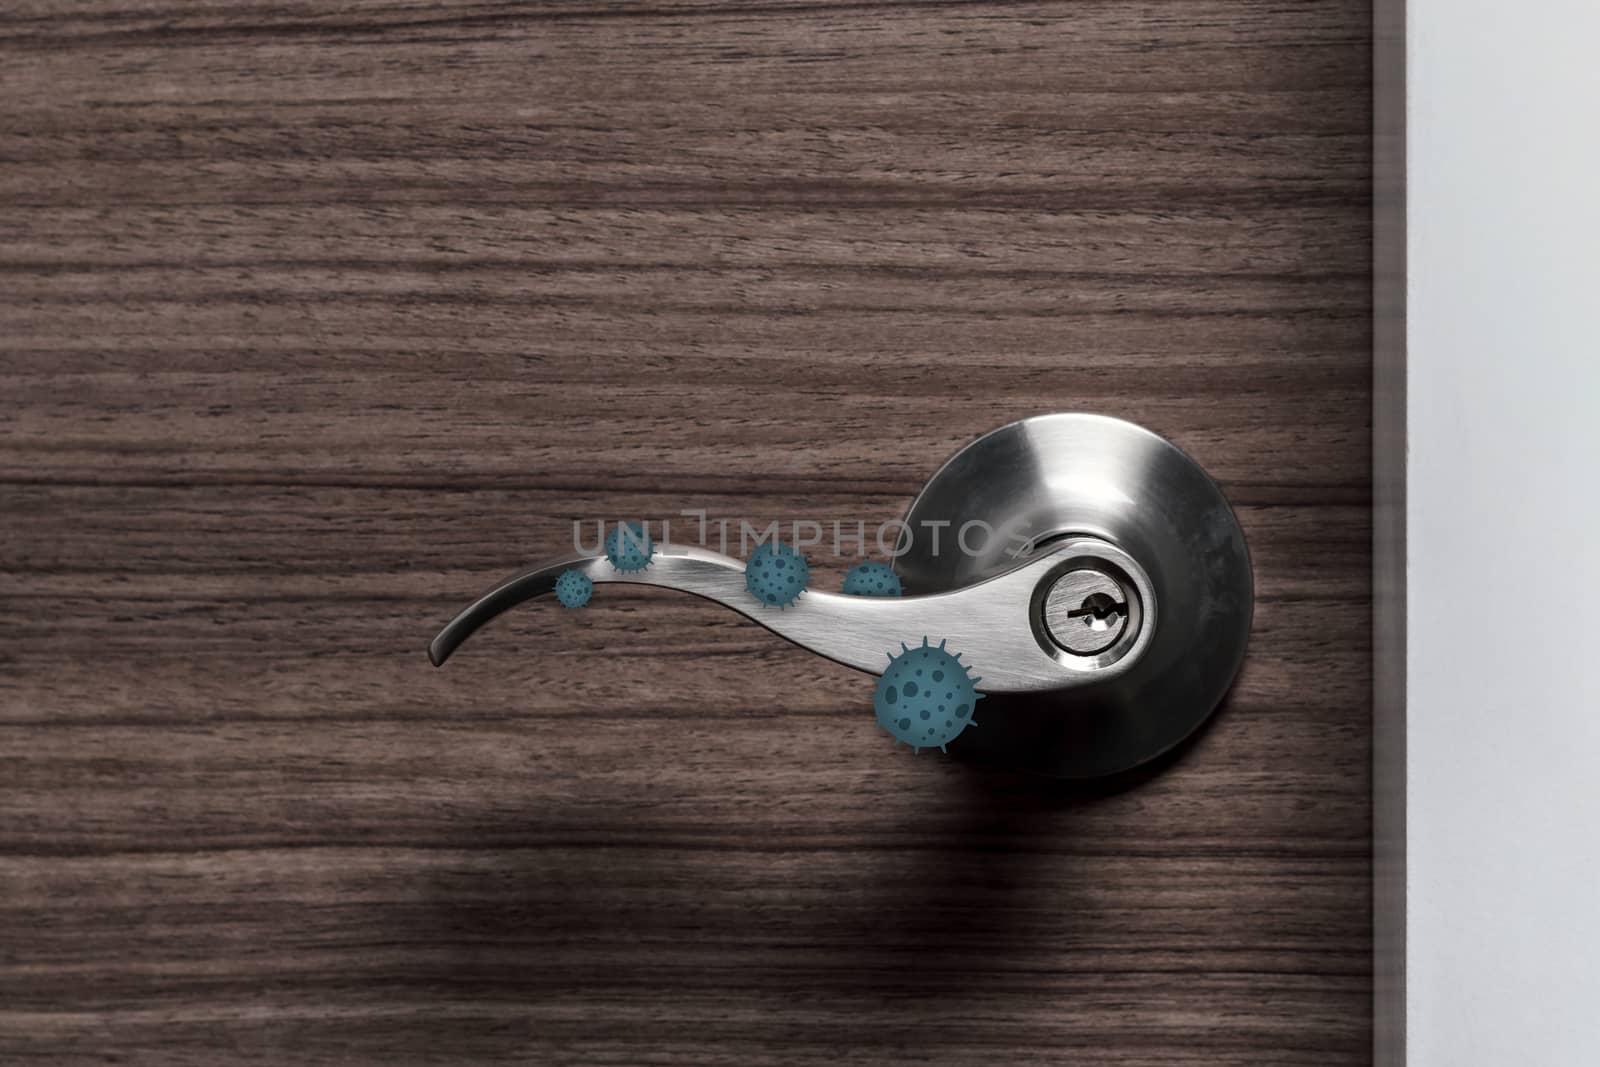 stainless door knob or handle on wooden door with virus or germ effect, concept of COVID-19 spread and prevention, shallow depth of field